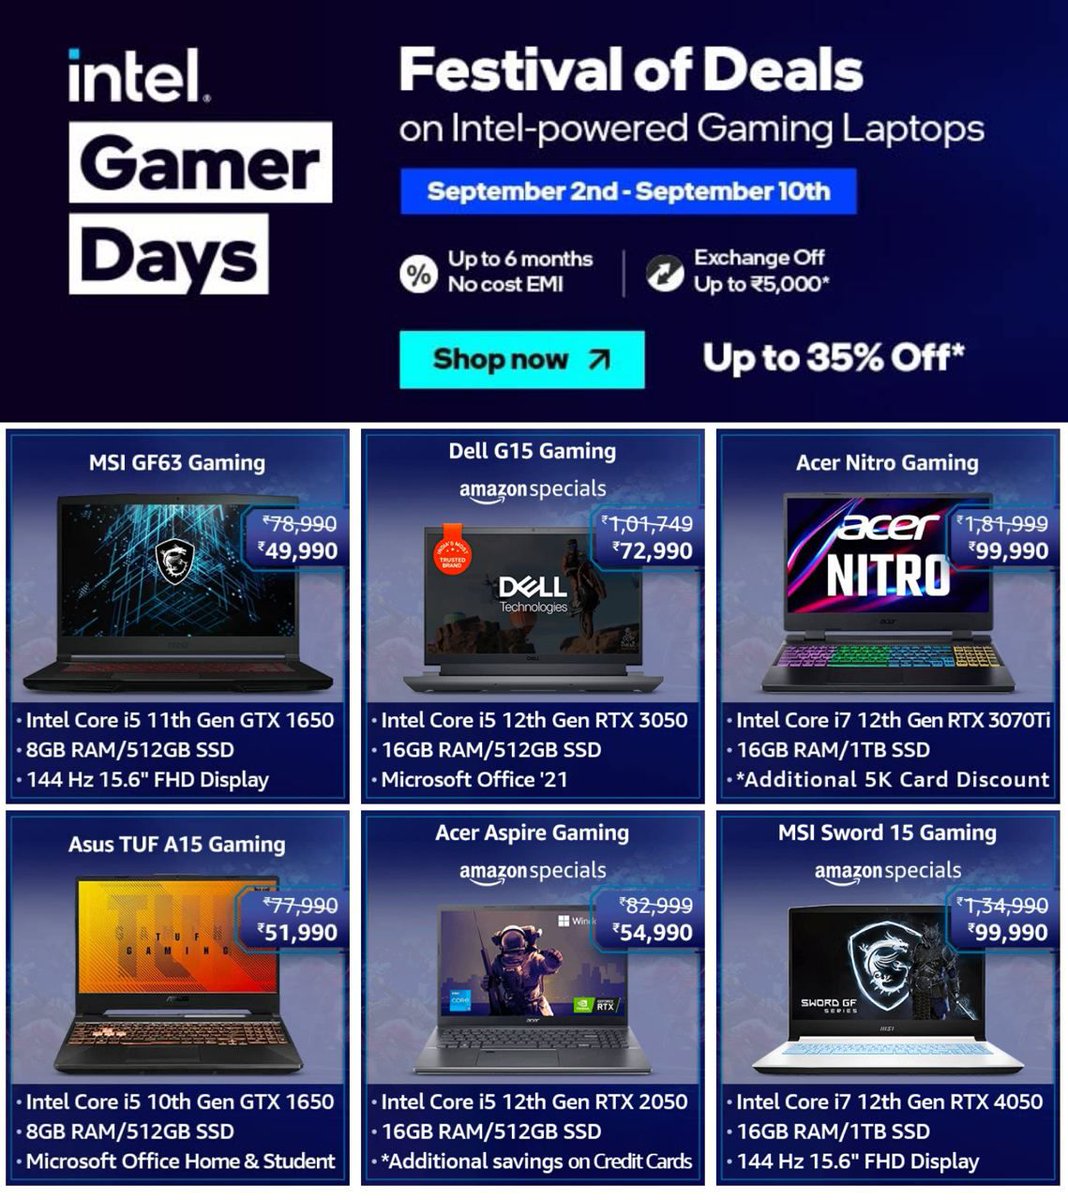 💻 intel Gamer Days ⚡️ Up to 35% Off
– Live till 10th Sep
– Up to 6 months No Cost EMI
– Exchange off up to Rs 5,000
Shop Now on Amazon 👇
amzn.to/3EoroBl

#IntelLaptop #IntelGamerDays #GamingLaptop #gaming #gamingcommunity #hrstech1